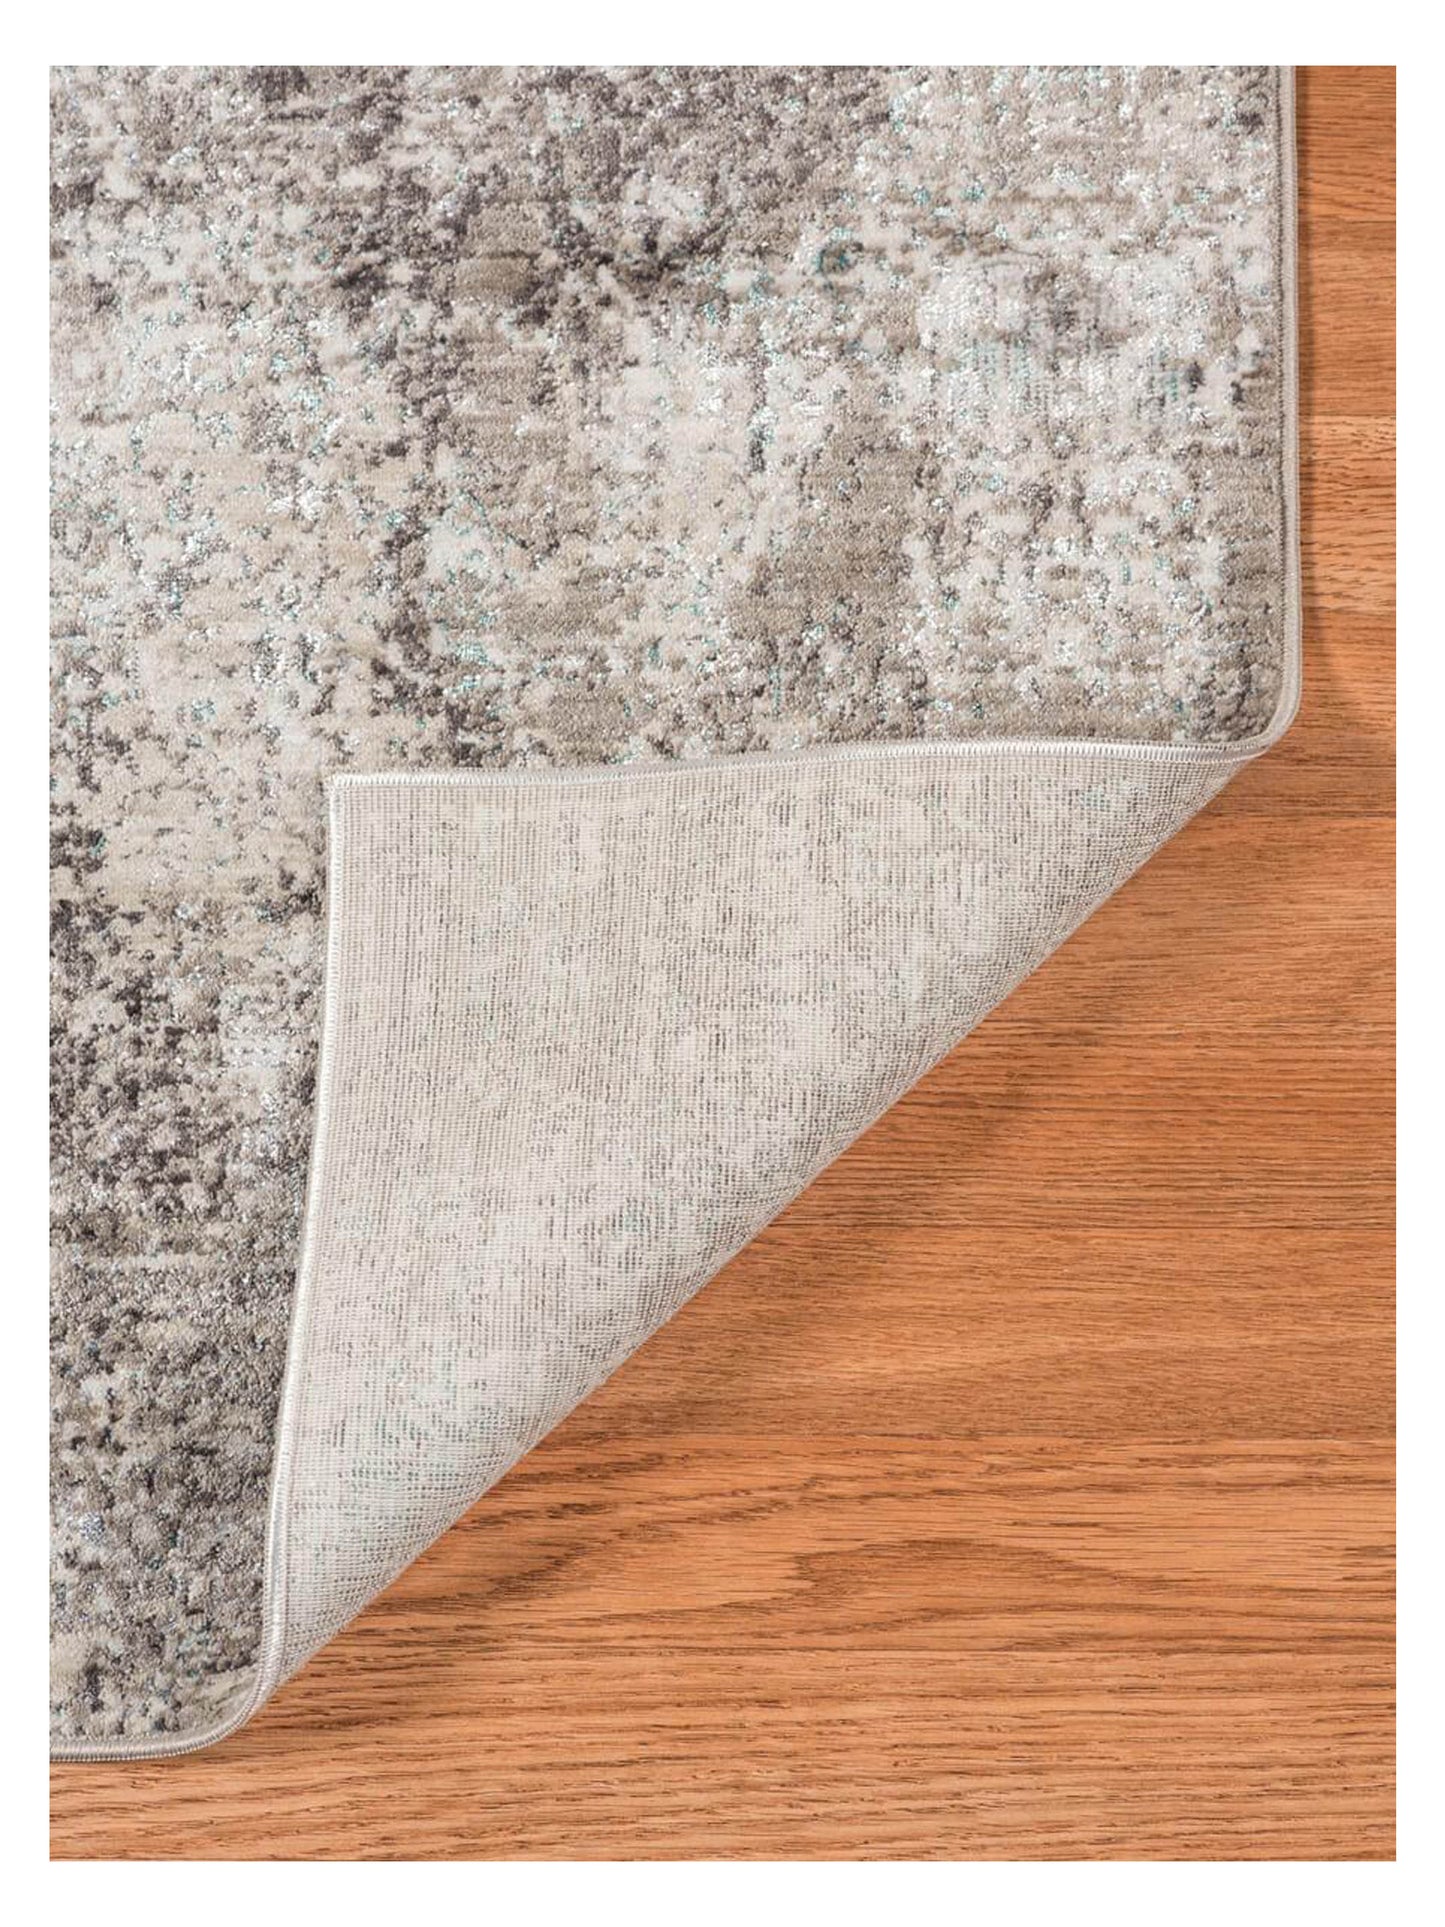 Limited Rosy RO-504 LIGHT GRAY  Transitional Machinemade Rug